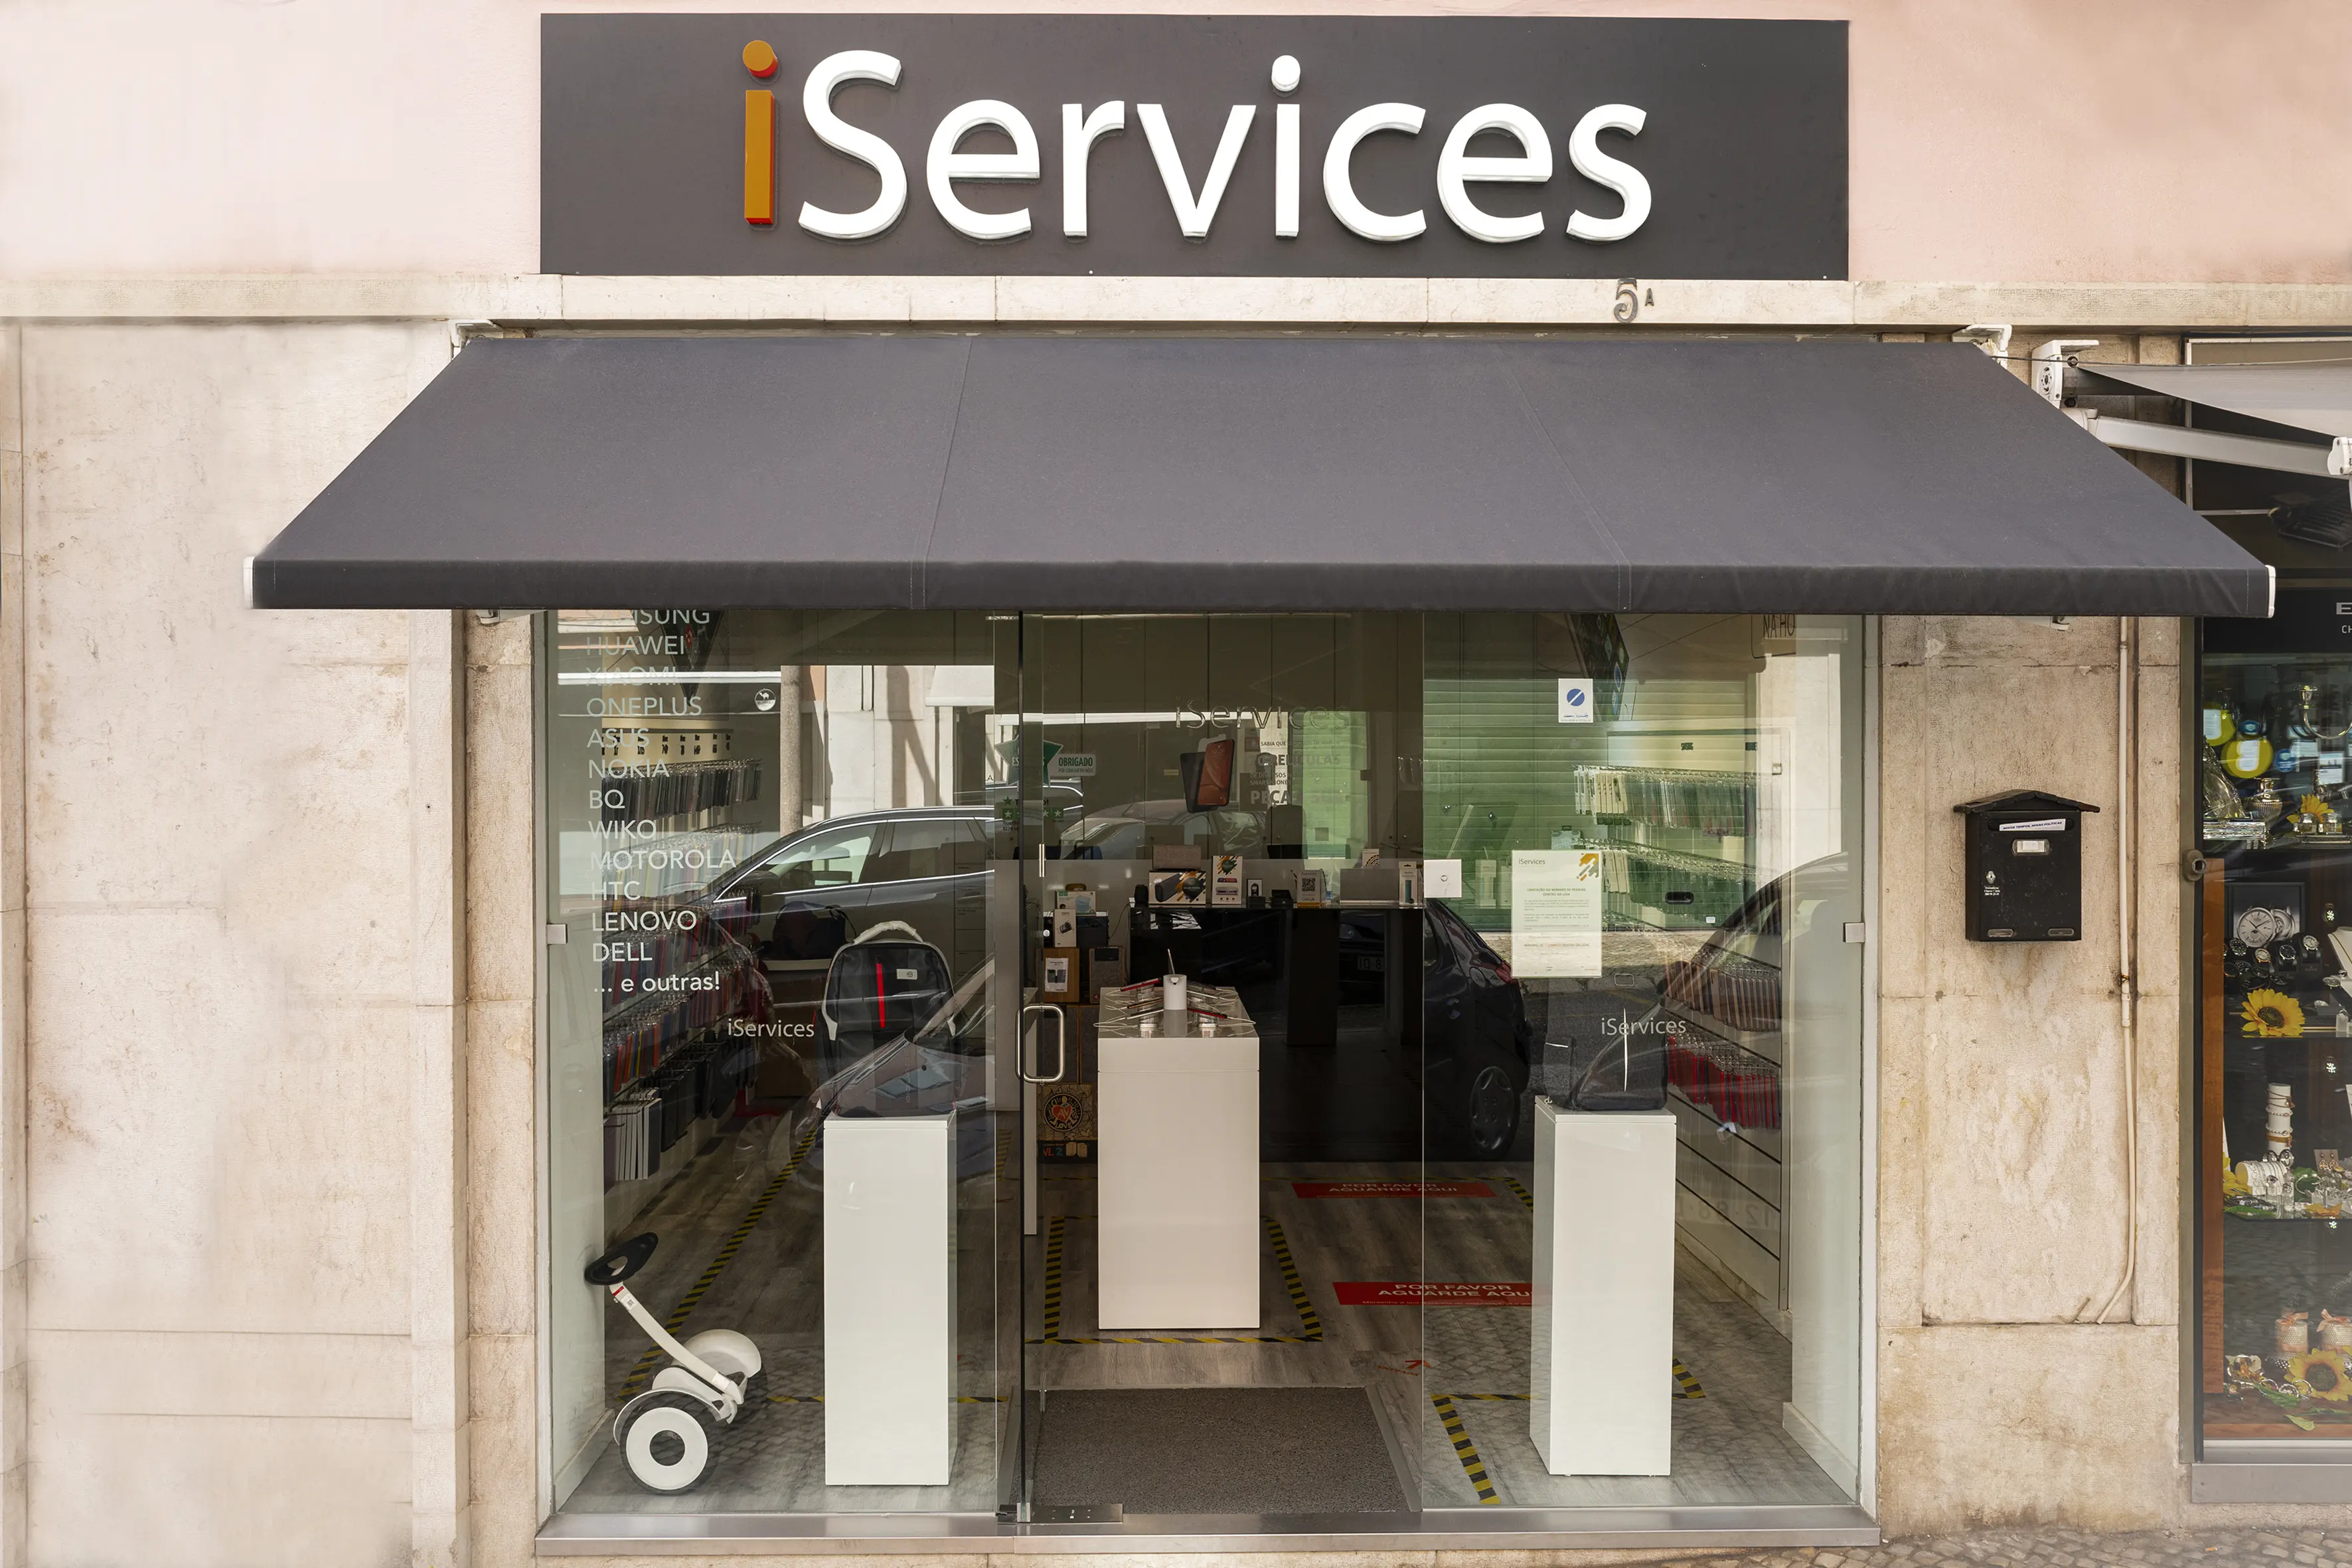 iServices Alvalade